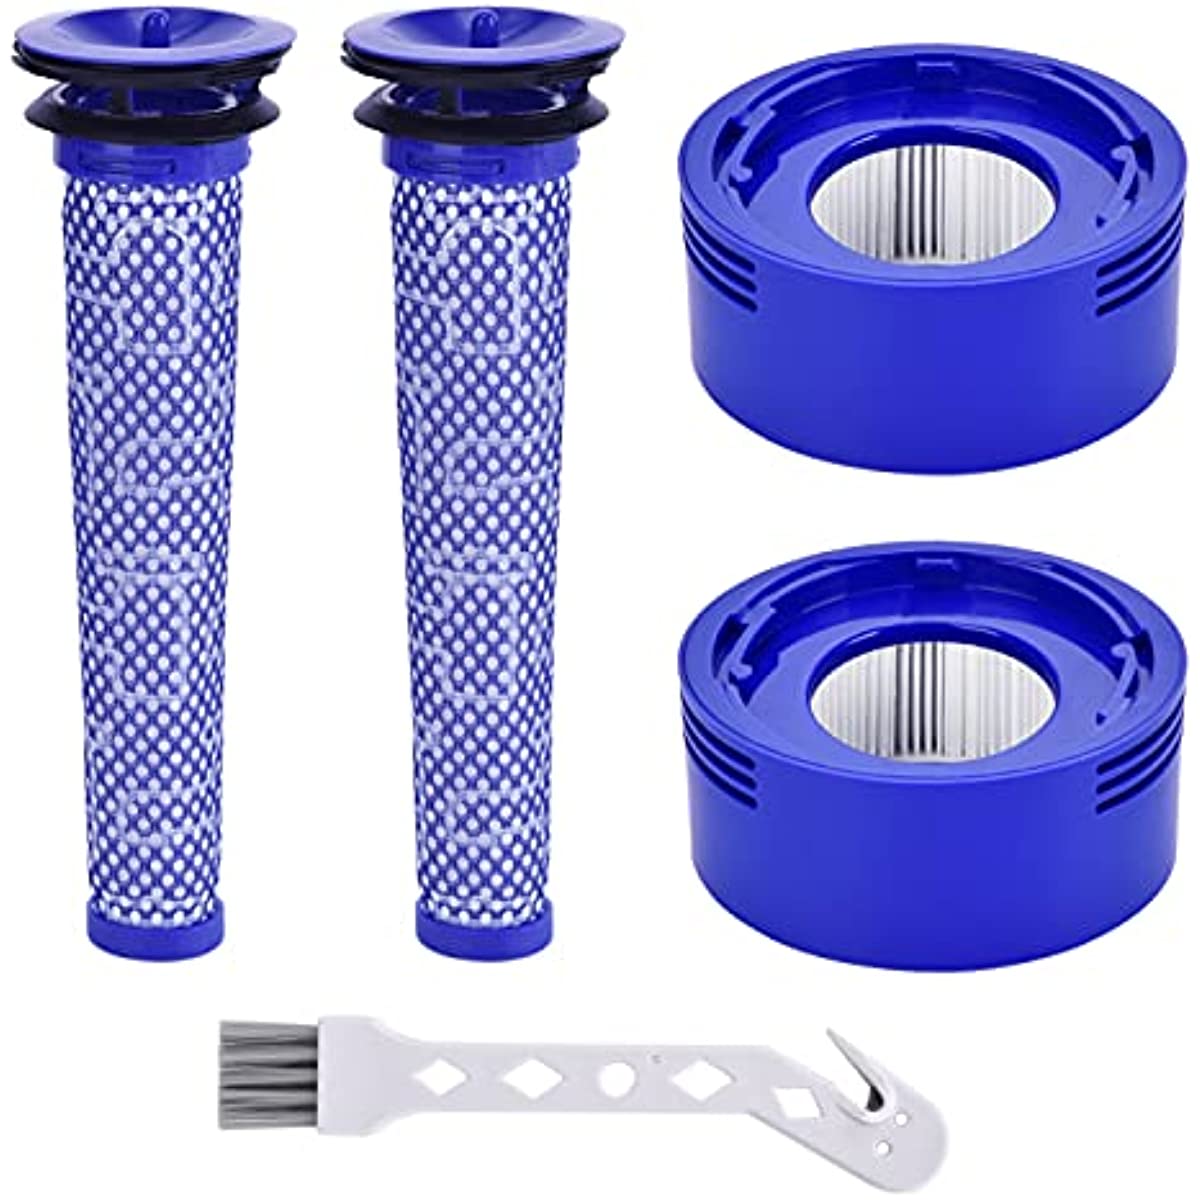 Filter Replacements for Dyson V11 Animal, V11 Torque Drive V15 Detect  Cordless Vacuum, Replace Part # 970013-02 (2 Pack) 